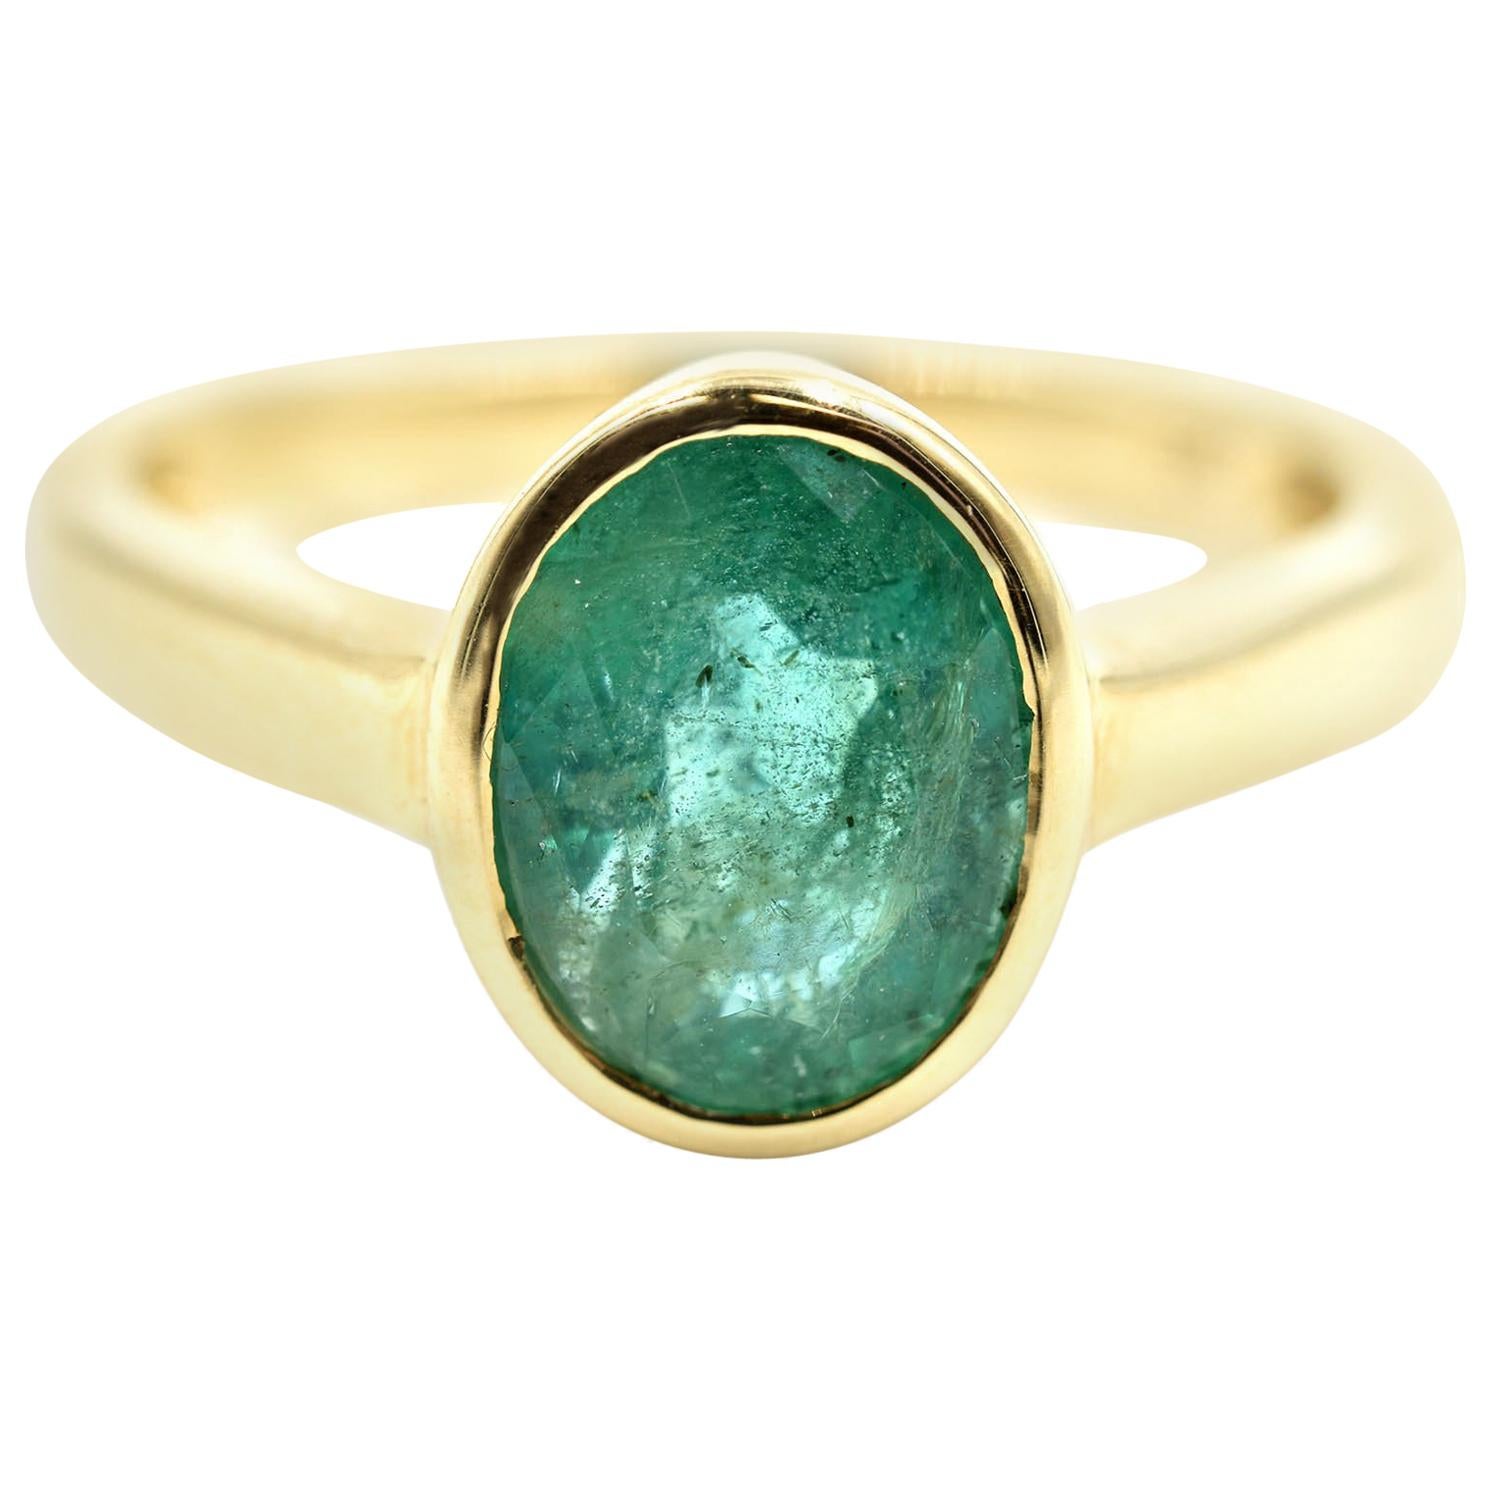 Oval Cut Emerald Solitaire Ring 14 Karat Yellow Gold